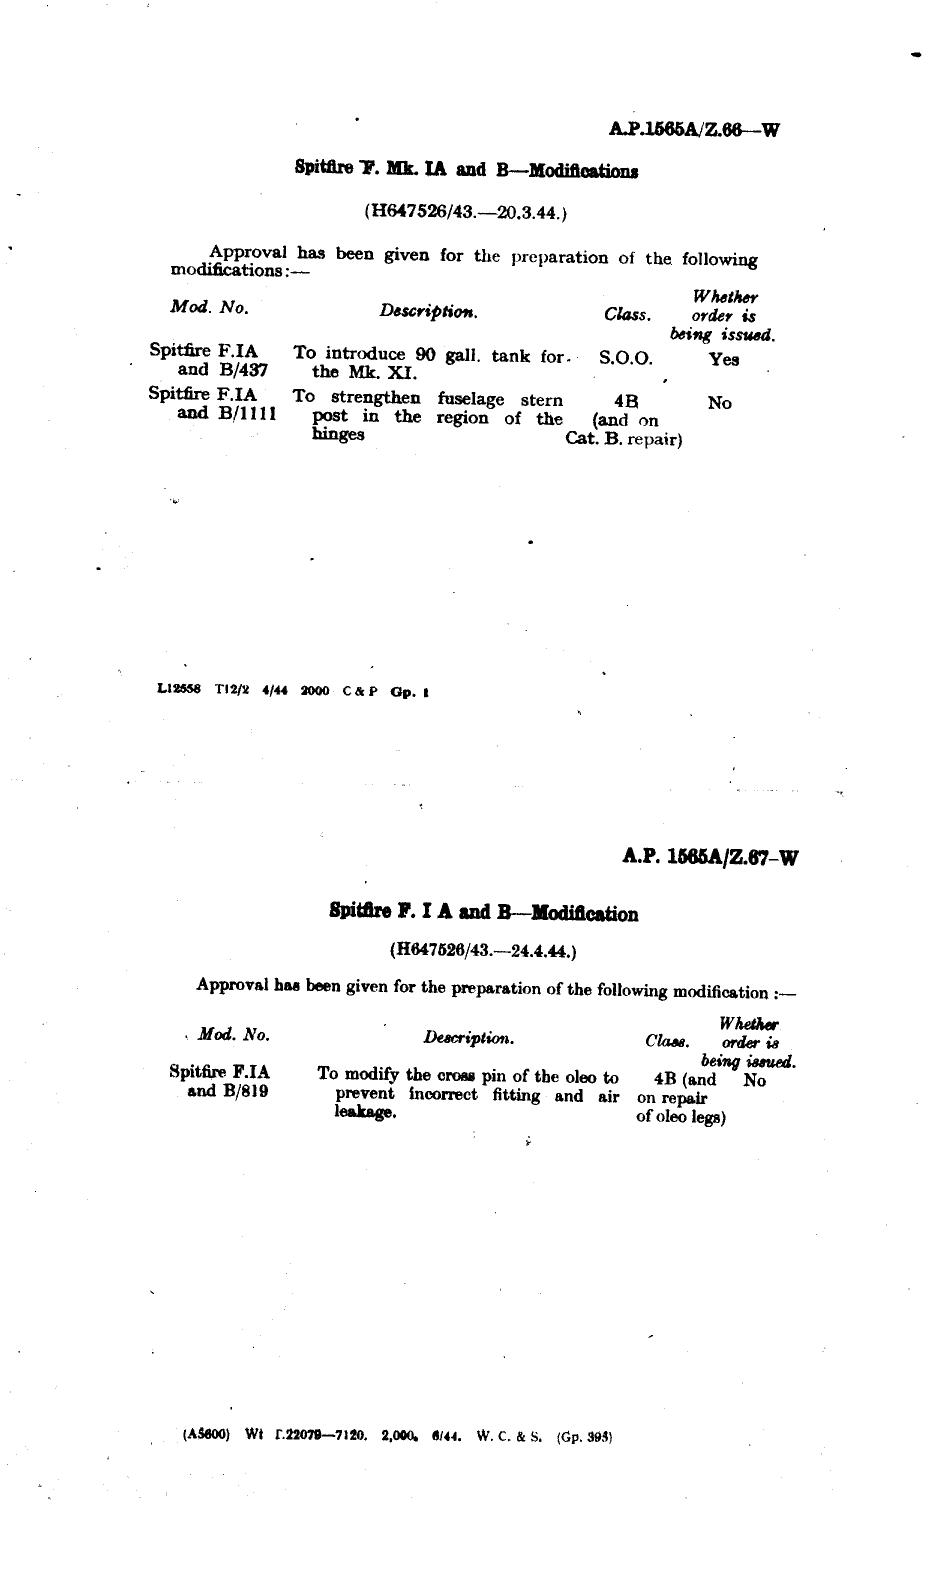 Sample page 1 from AirCorps Library document: Spitfire F Mk. IA and B Modifications 437 and 1111